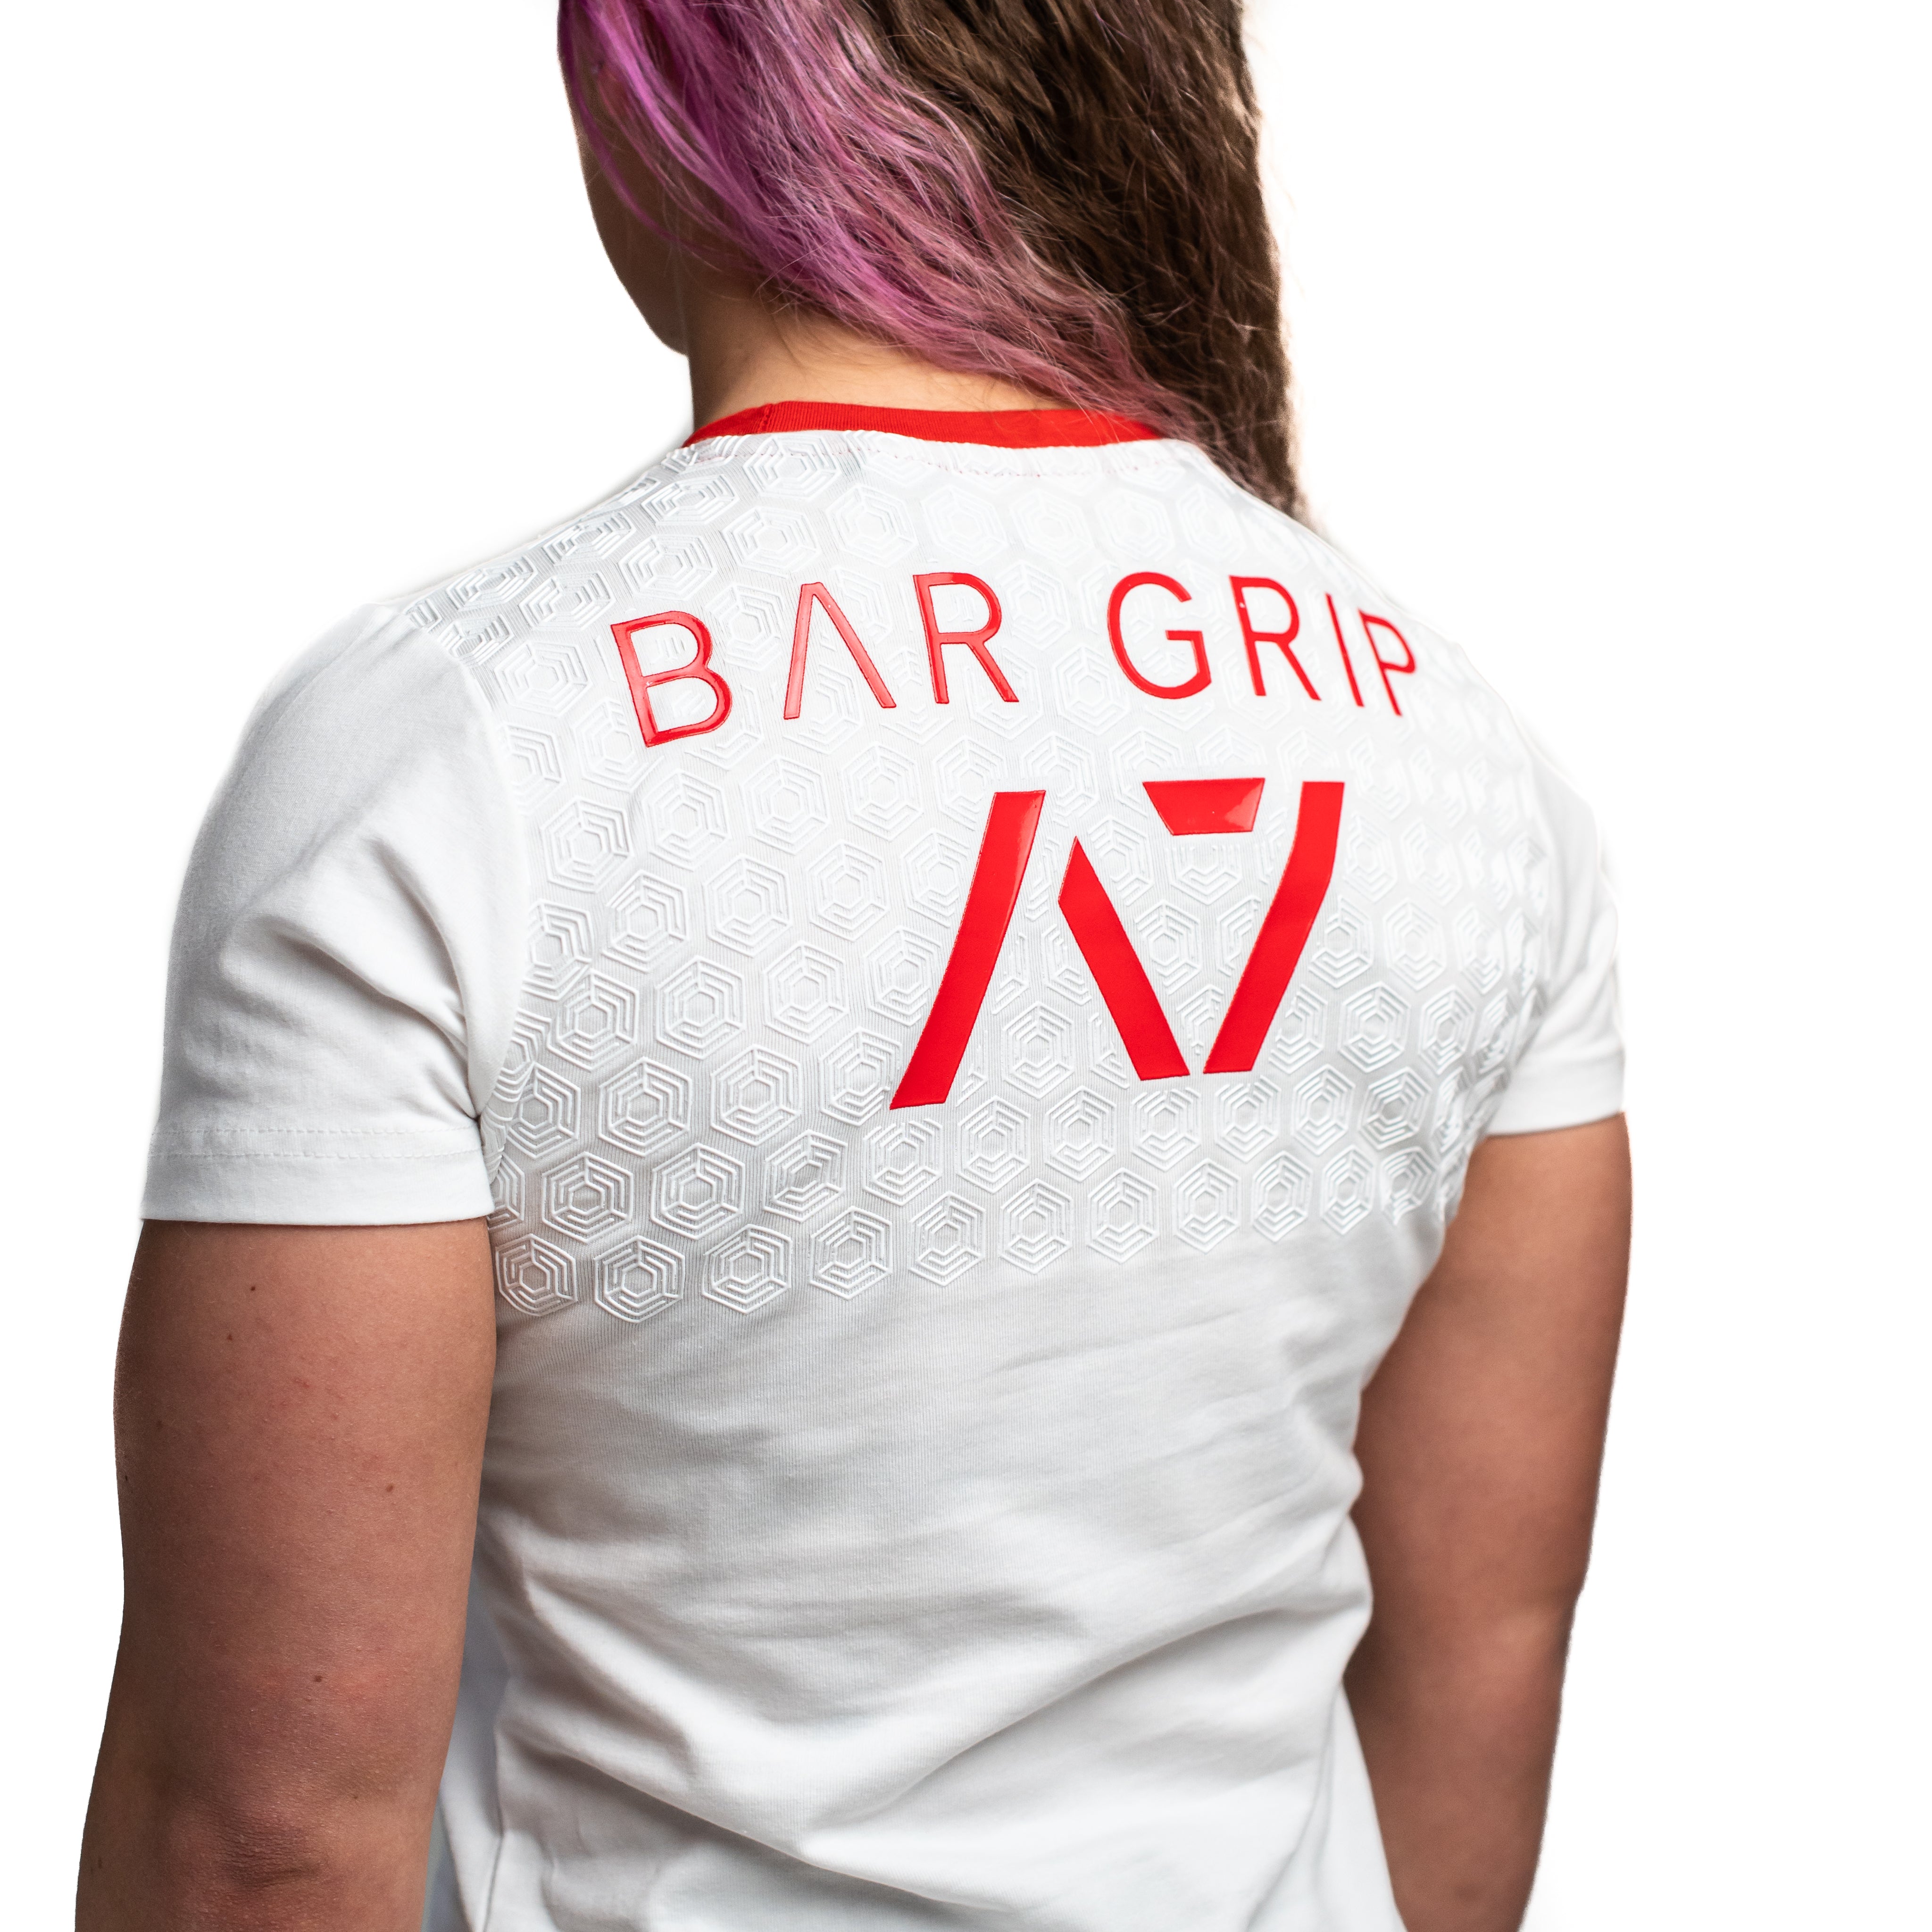 Groovin Bar Grip T-shirt, great as a squat shirt. Purchase Groovin Bar Grip t-shirt from A7 UK. Purchase Groovin Bar Grip Shirt Europe from A7 Europe. No more chalk and no more sliding. Best Bar Grip T shirts, shipping to UK and Europe from A7 UK. Groovin Bar Grip Shirt has a retro vibe while remining us to lift barbells. A7UK has the best Powerlifting apparel for all your workouts. Available in UK and Europe including France, Italy, Germany, the Netherlands, Sweden and Poland.